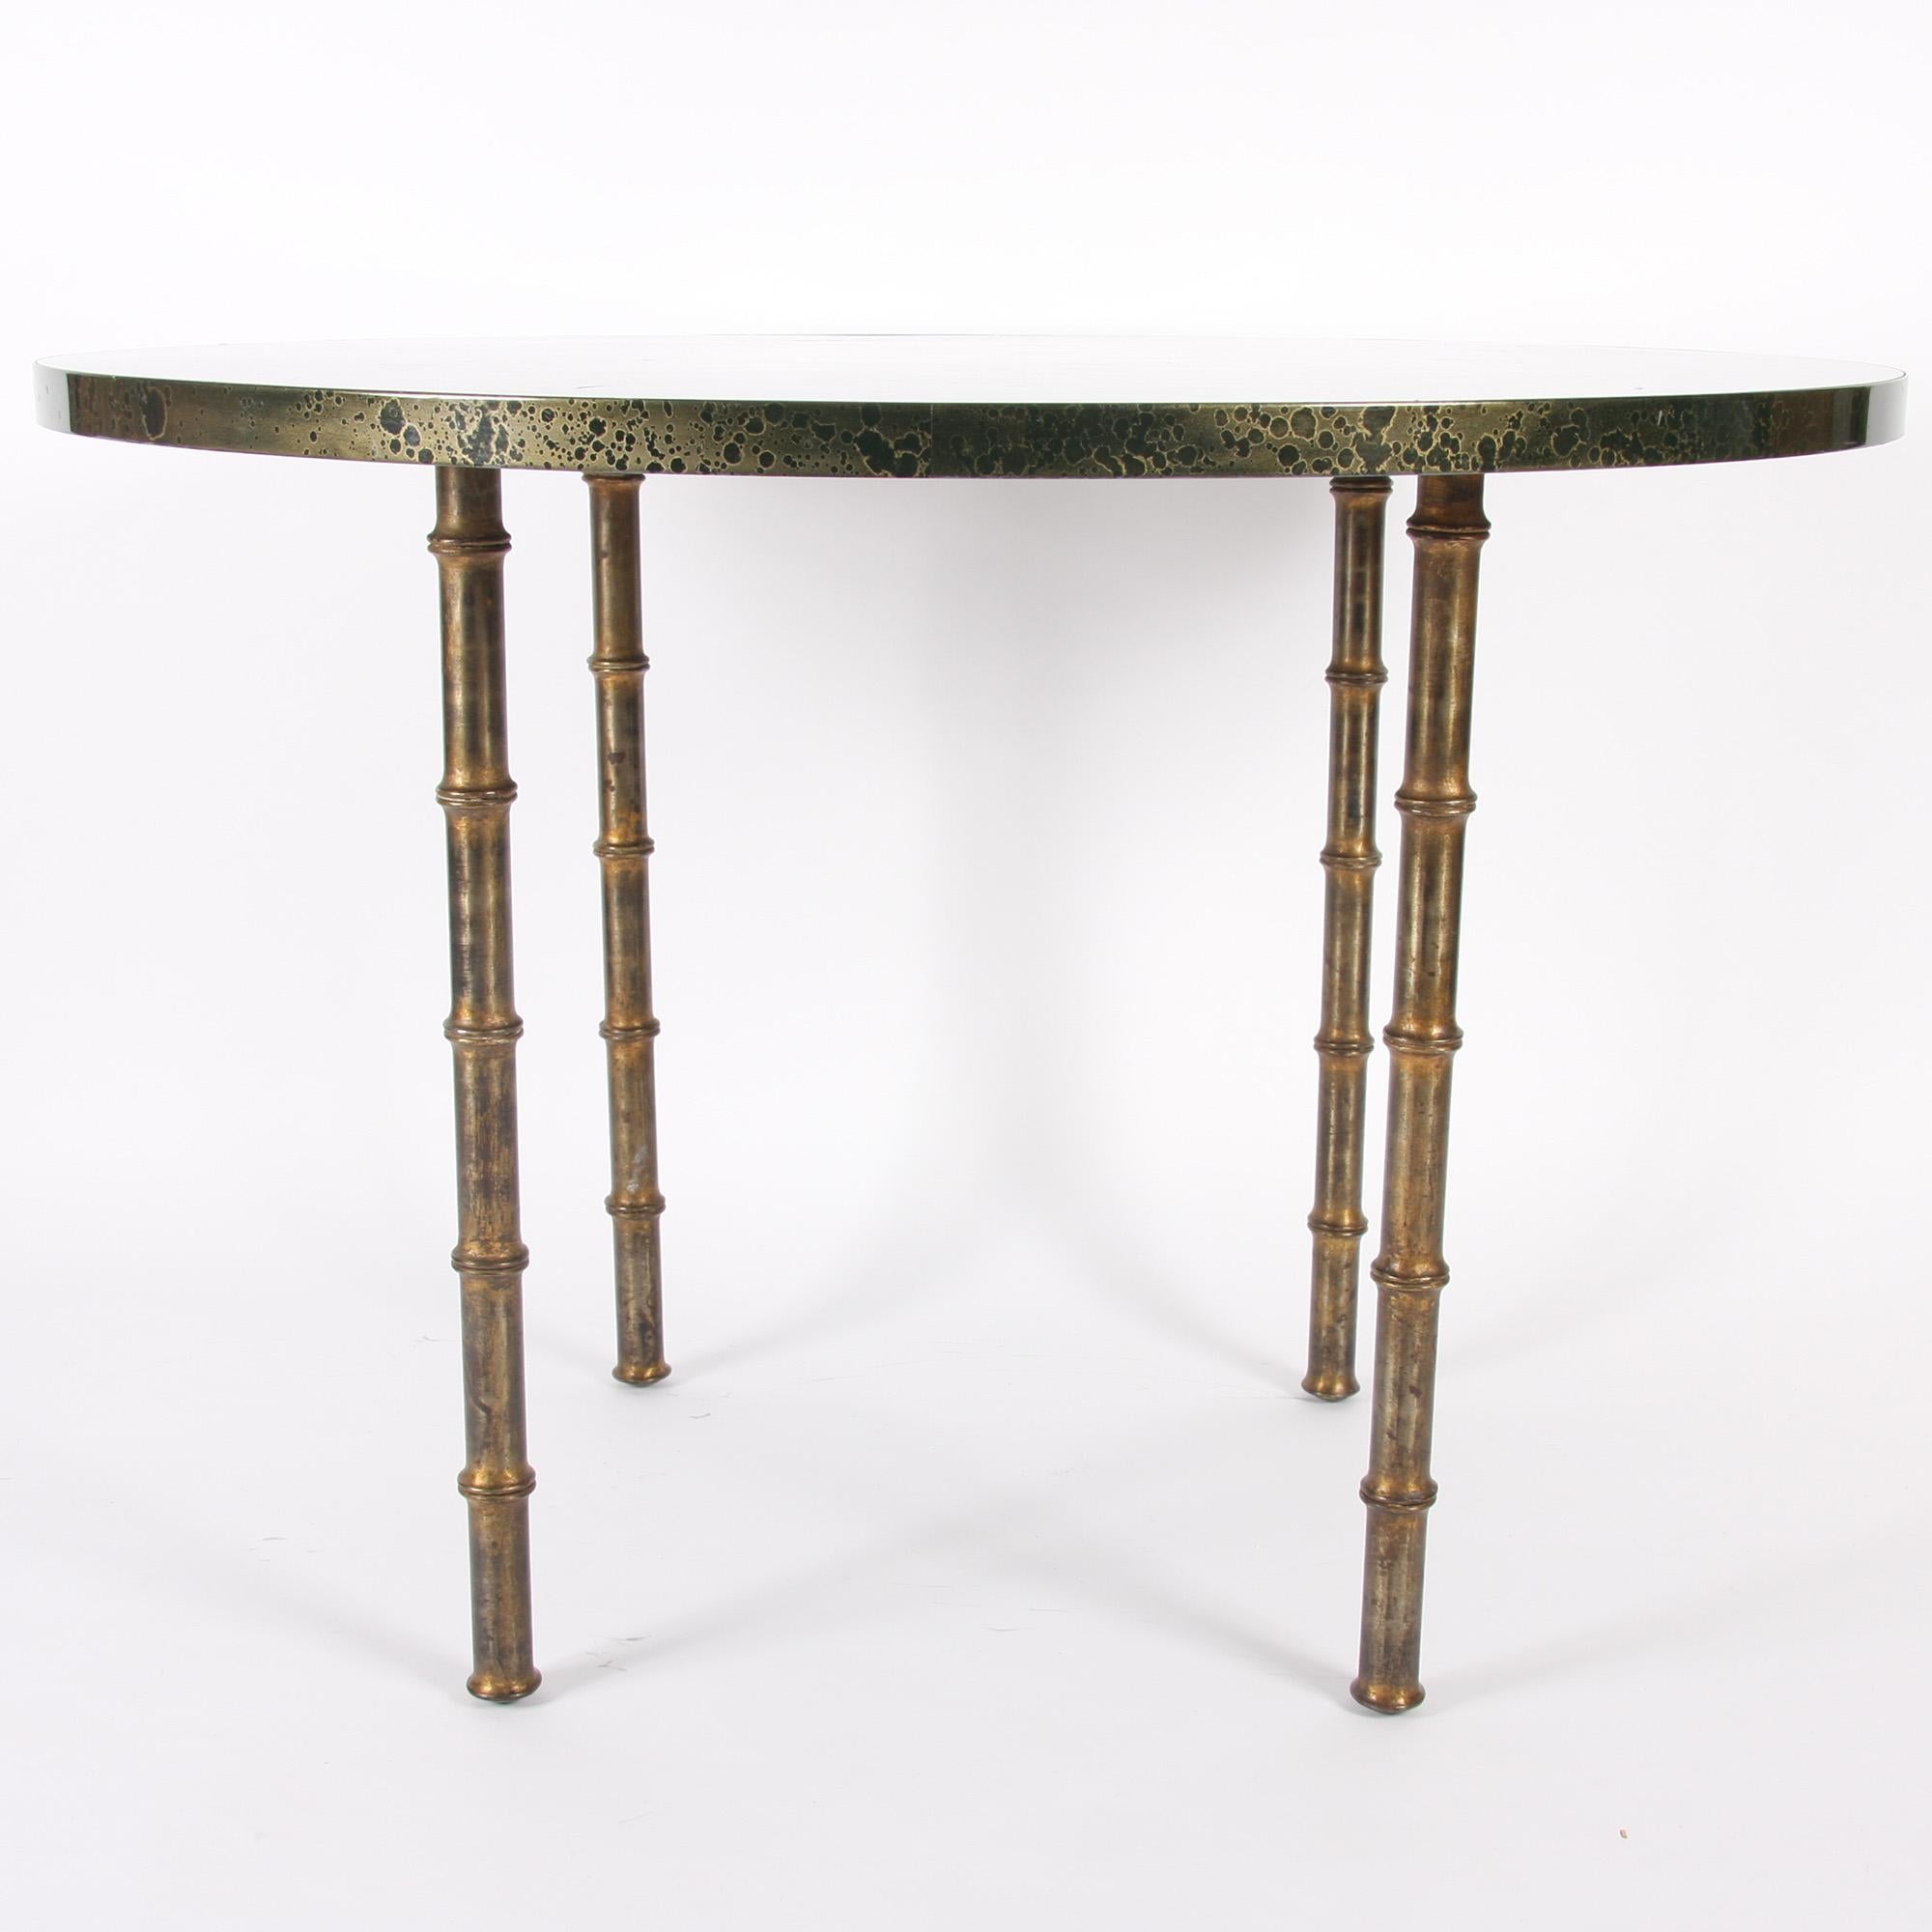 This stunning Maison Baguès style table, with a marble effect top speckled with gold, and gilt metal faux bamboo legs, dates back to 1970s France.